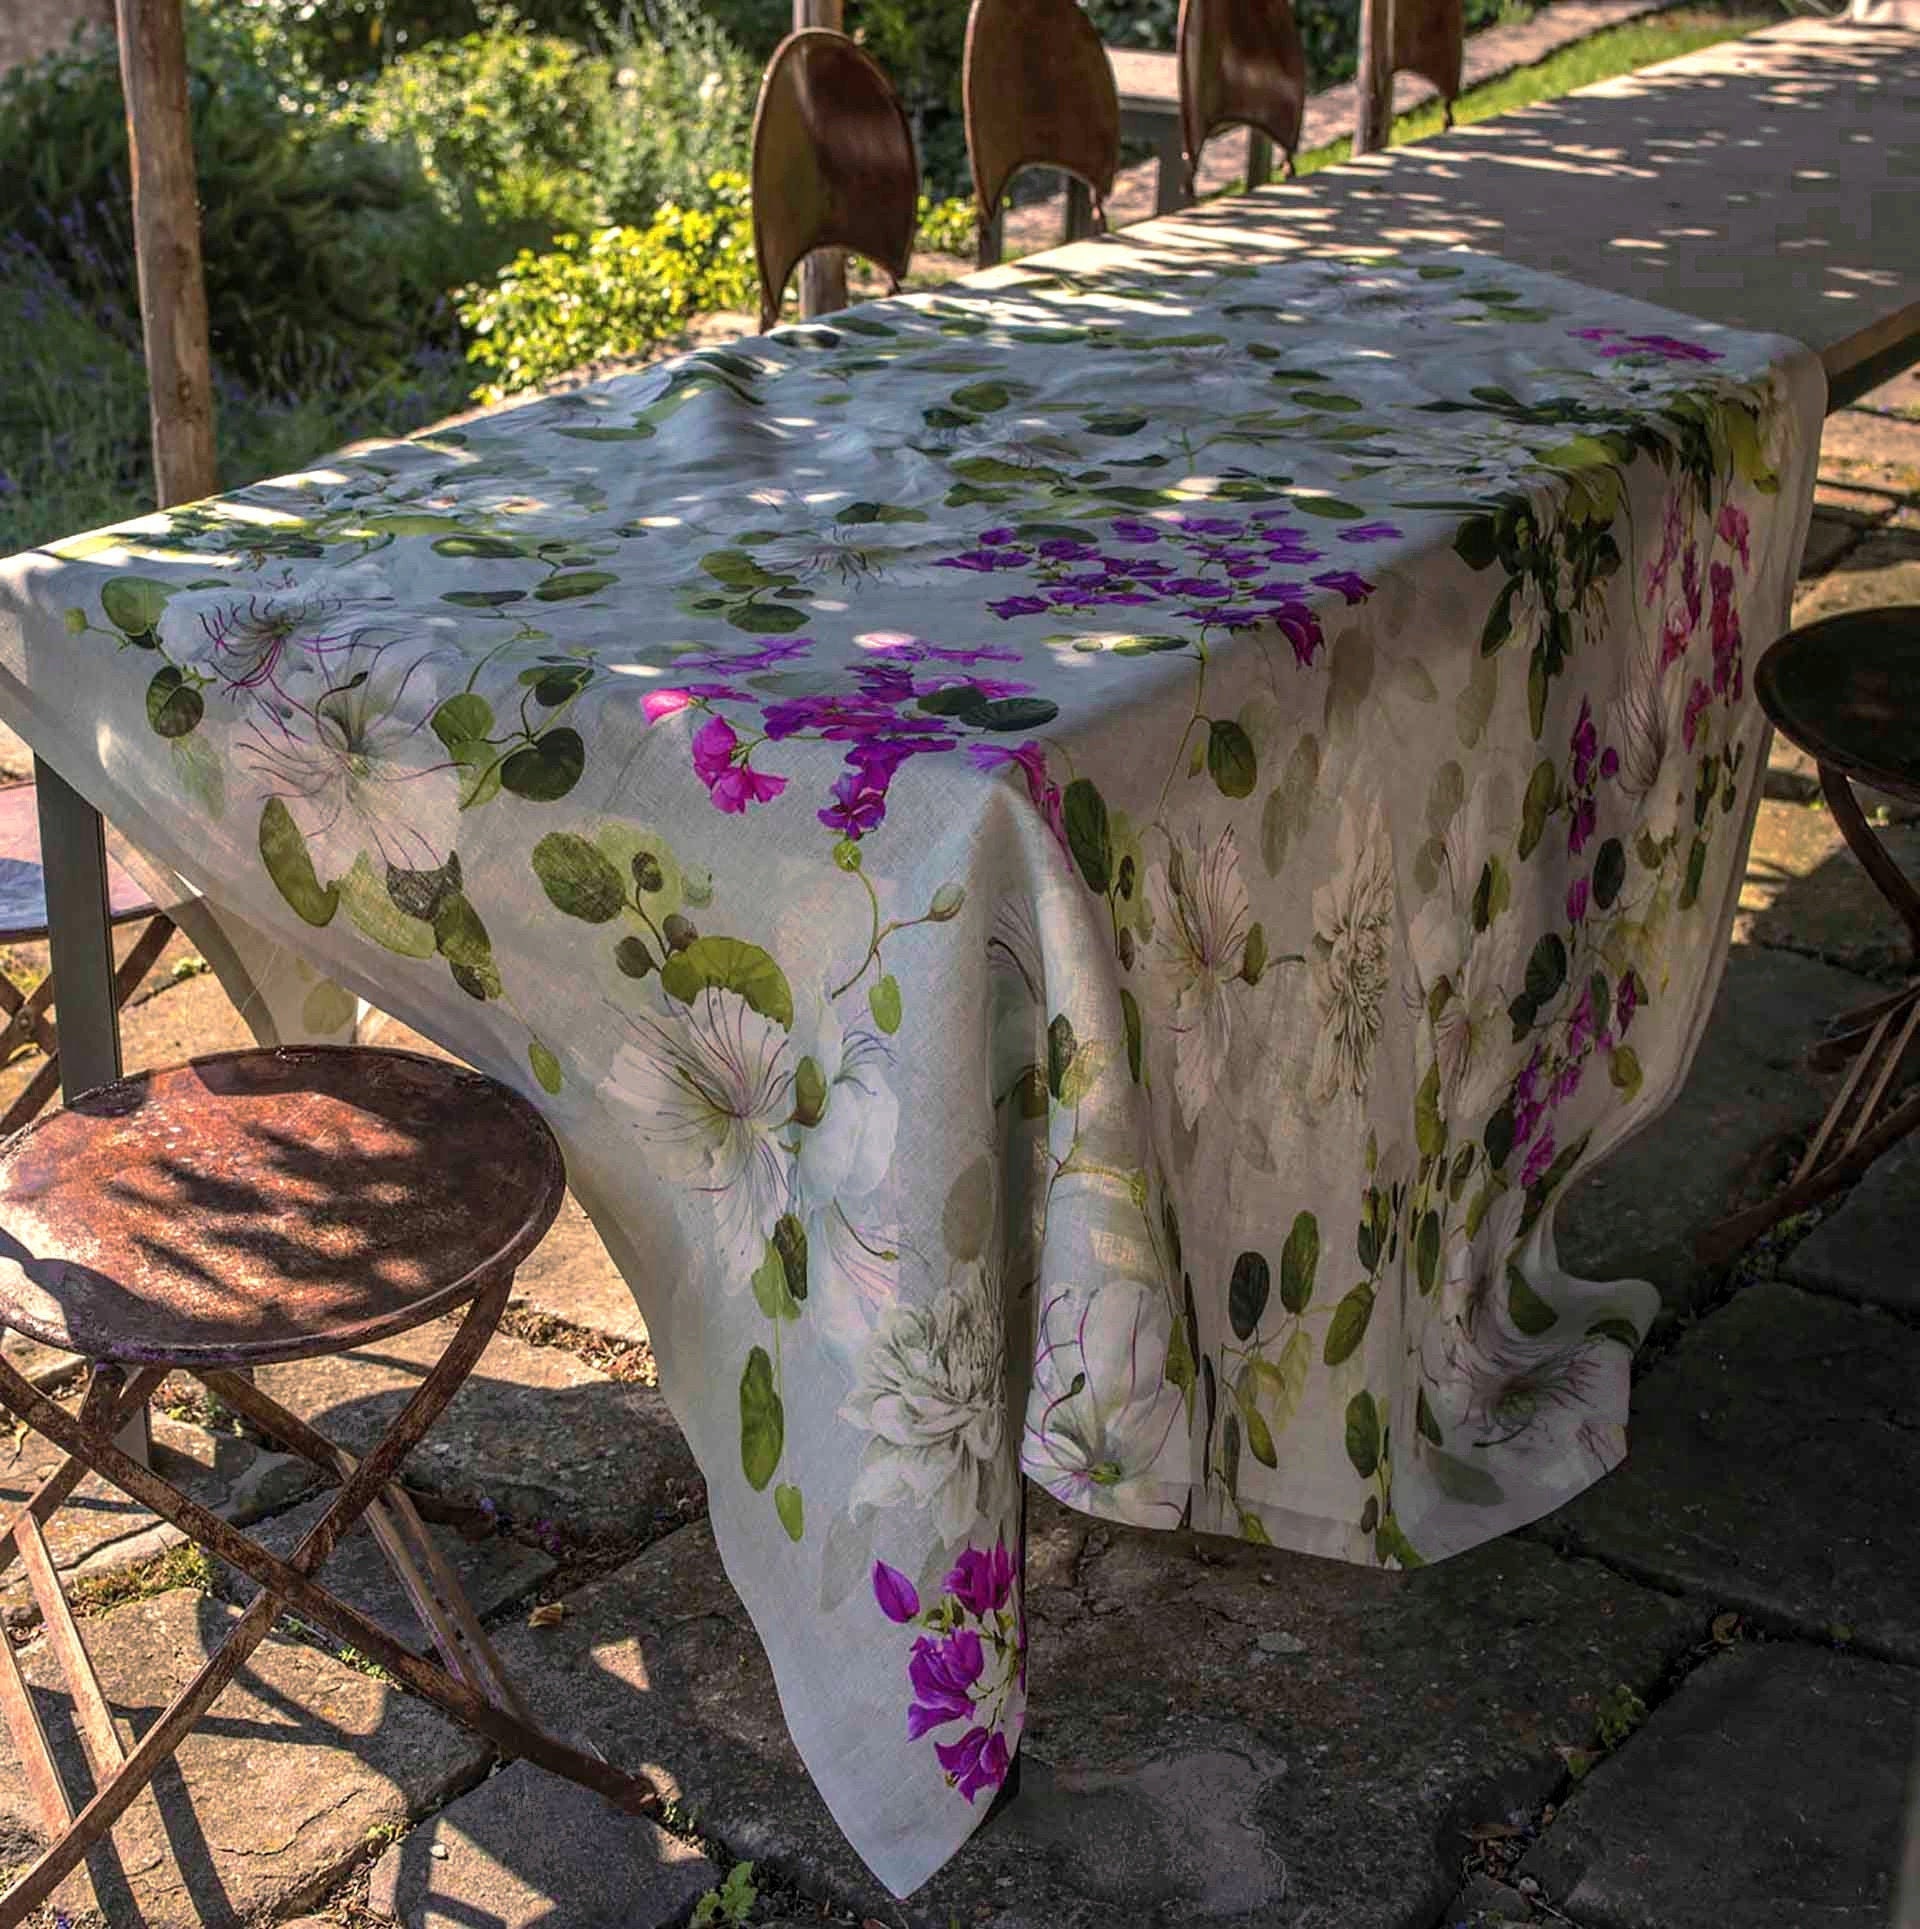 Details about   Monreale Tablecloth 100% Cotton Round Made in Italy 